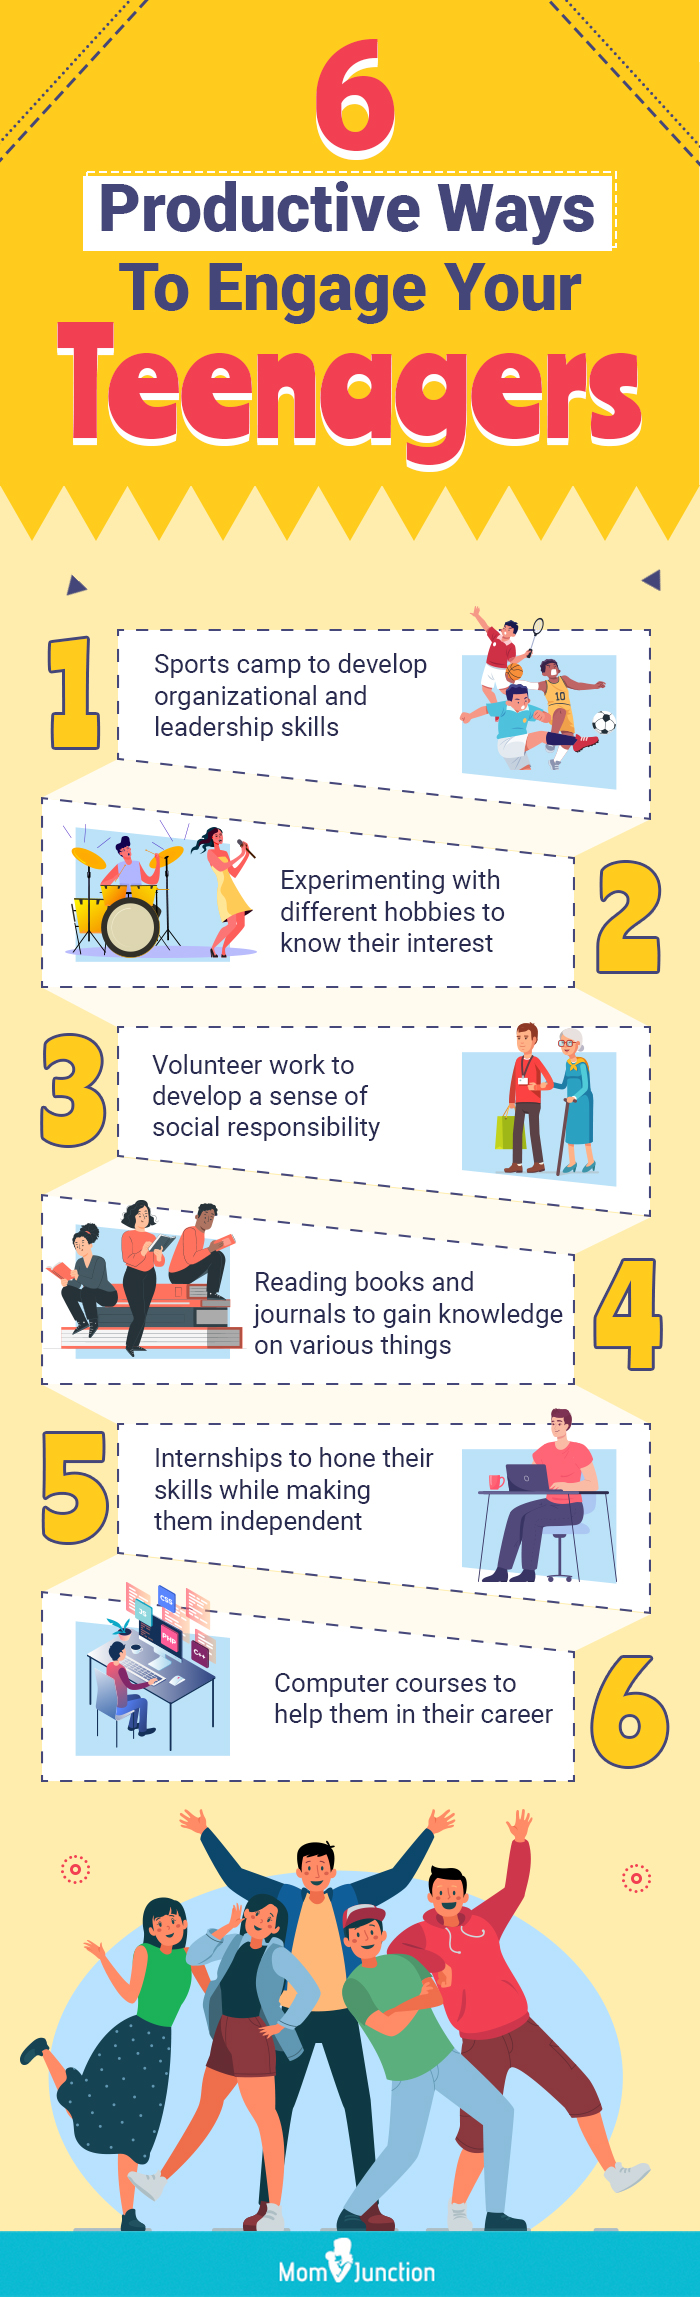 ways to engage your teenagers (infographic)